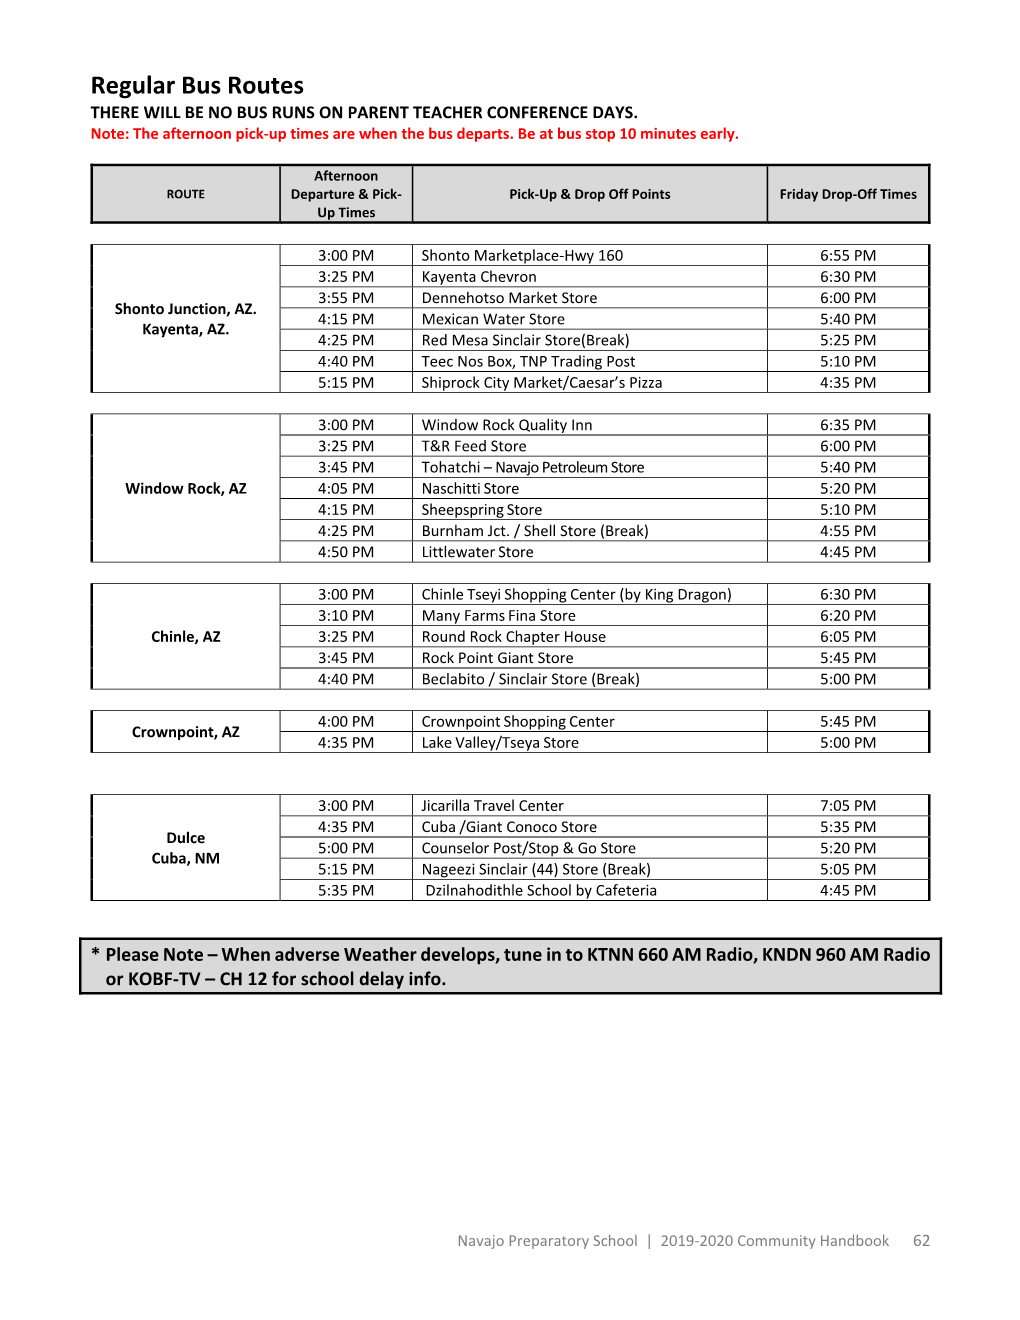 Regular Bus Routes THERE WILL BE NO BUS RUNS on PARENT TEACHER CONFERENCE DAYS